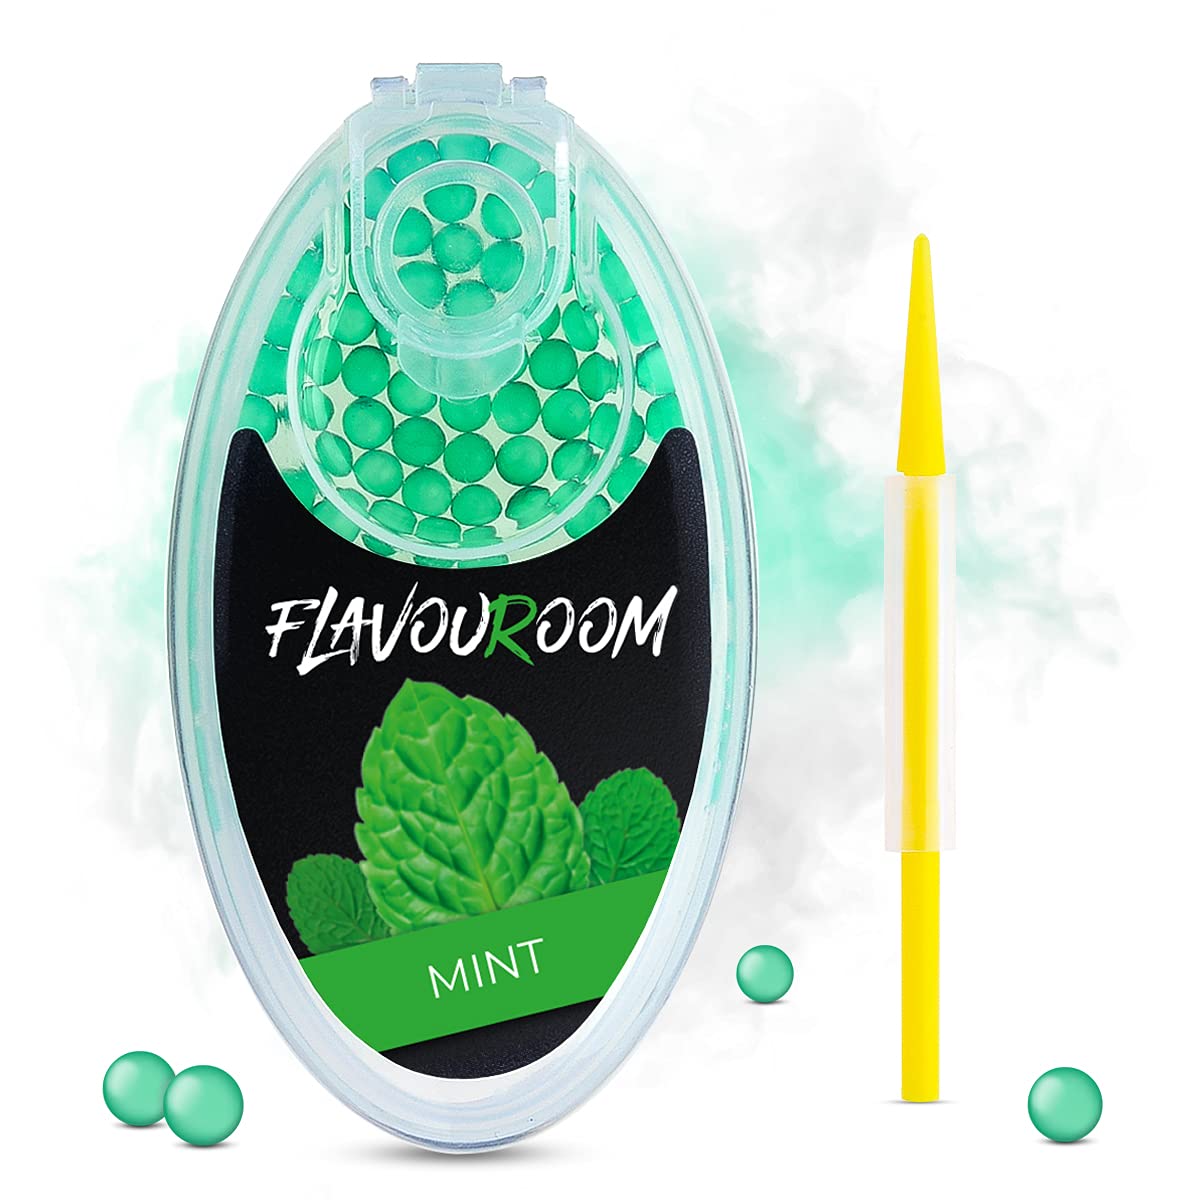 Flavouroom - Premium Mint Capsules Set of 100 | DIY Mint Filter for Unforgettable Flavour | Includes Box for Storing the Aromatic Click Sleeves Balls